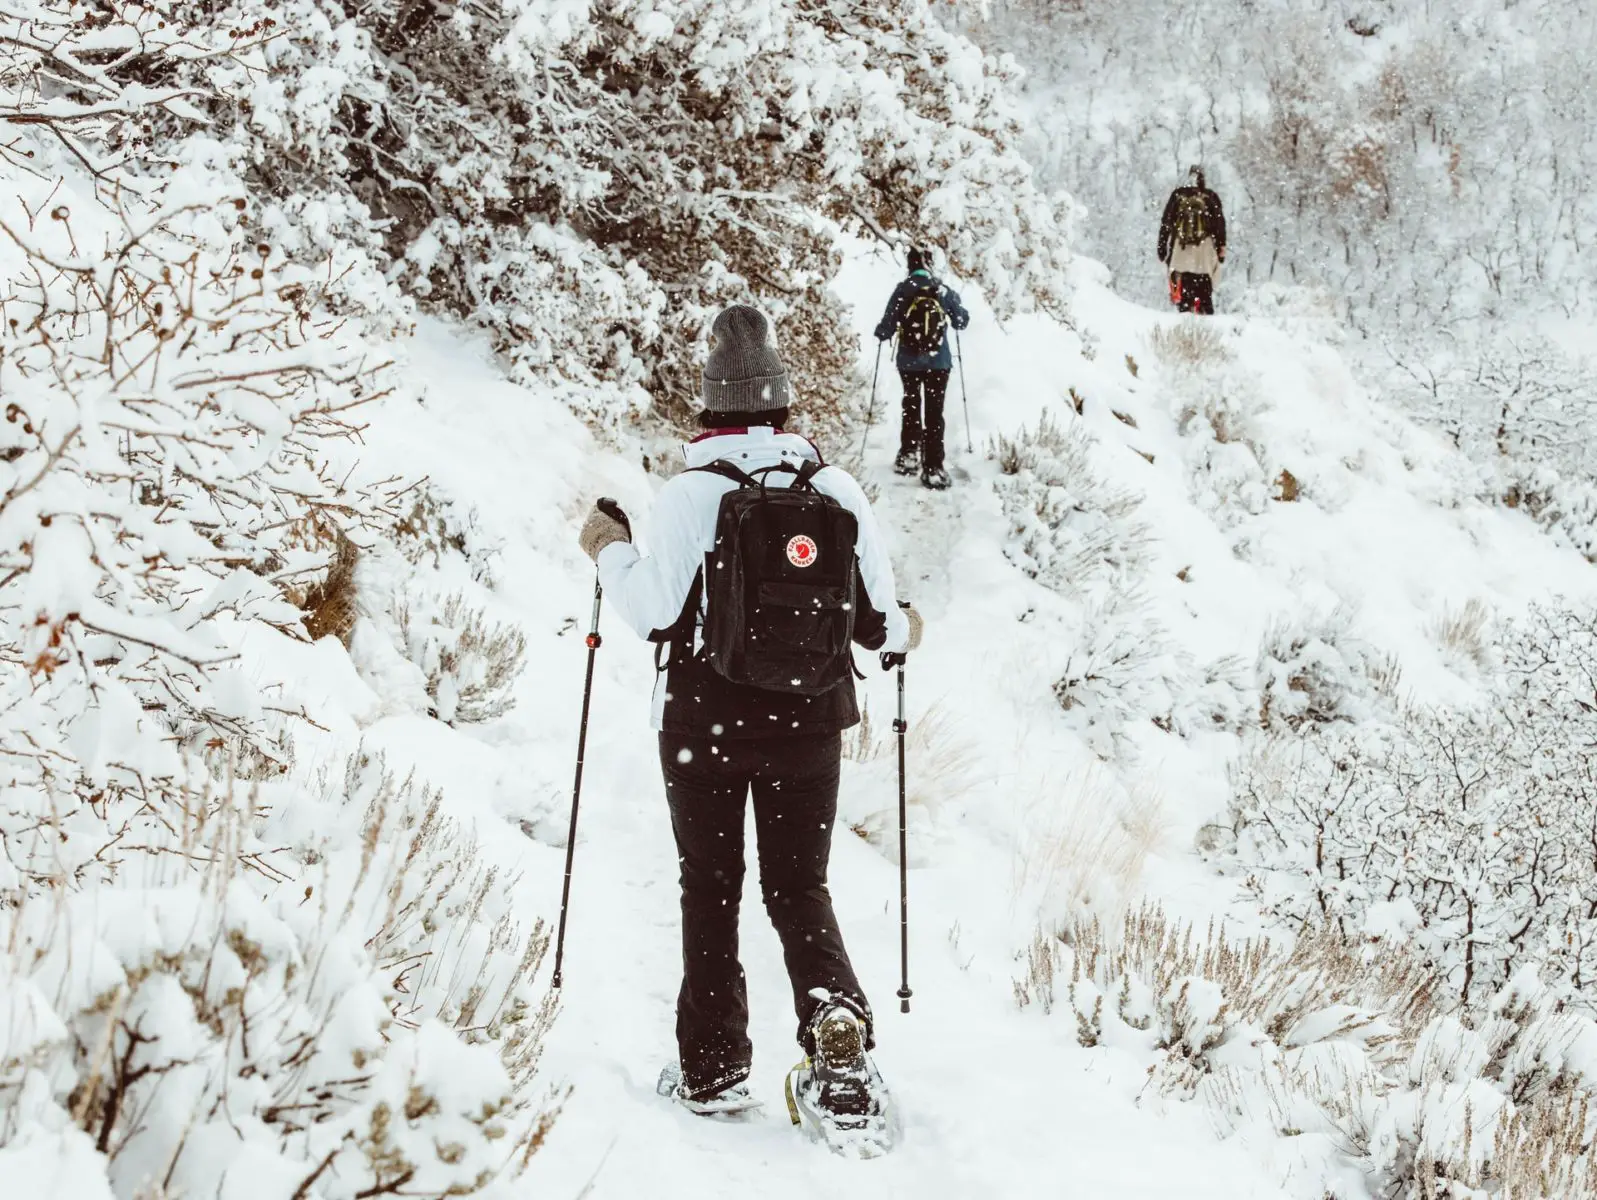 Using snowshoe poles with mud baskets instead of snow baskets - Photo: Taylor Brandon